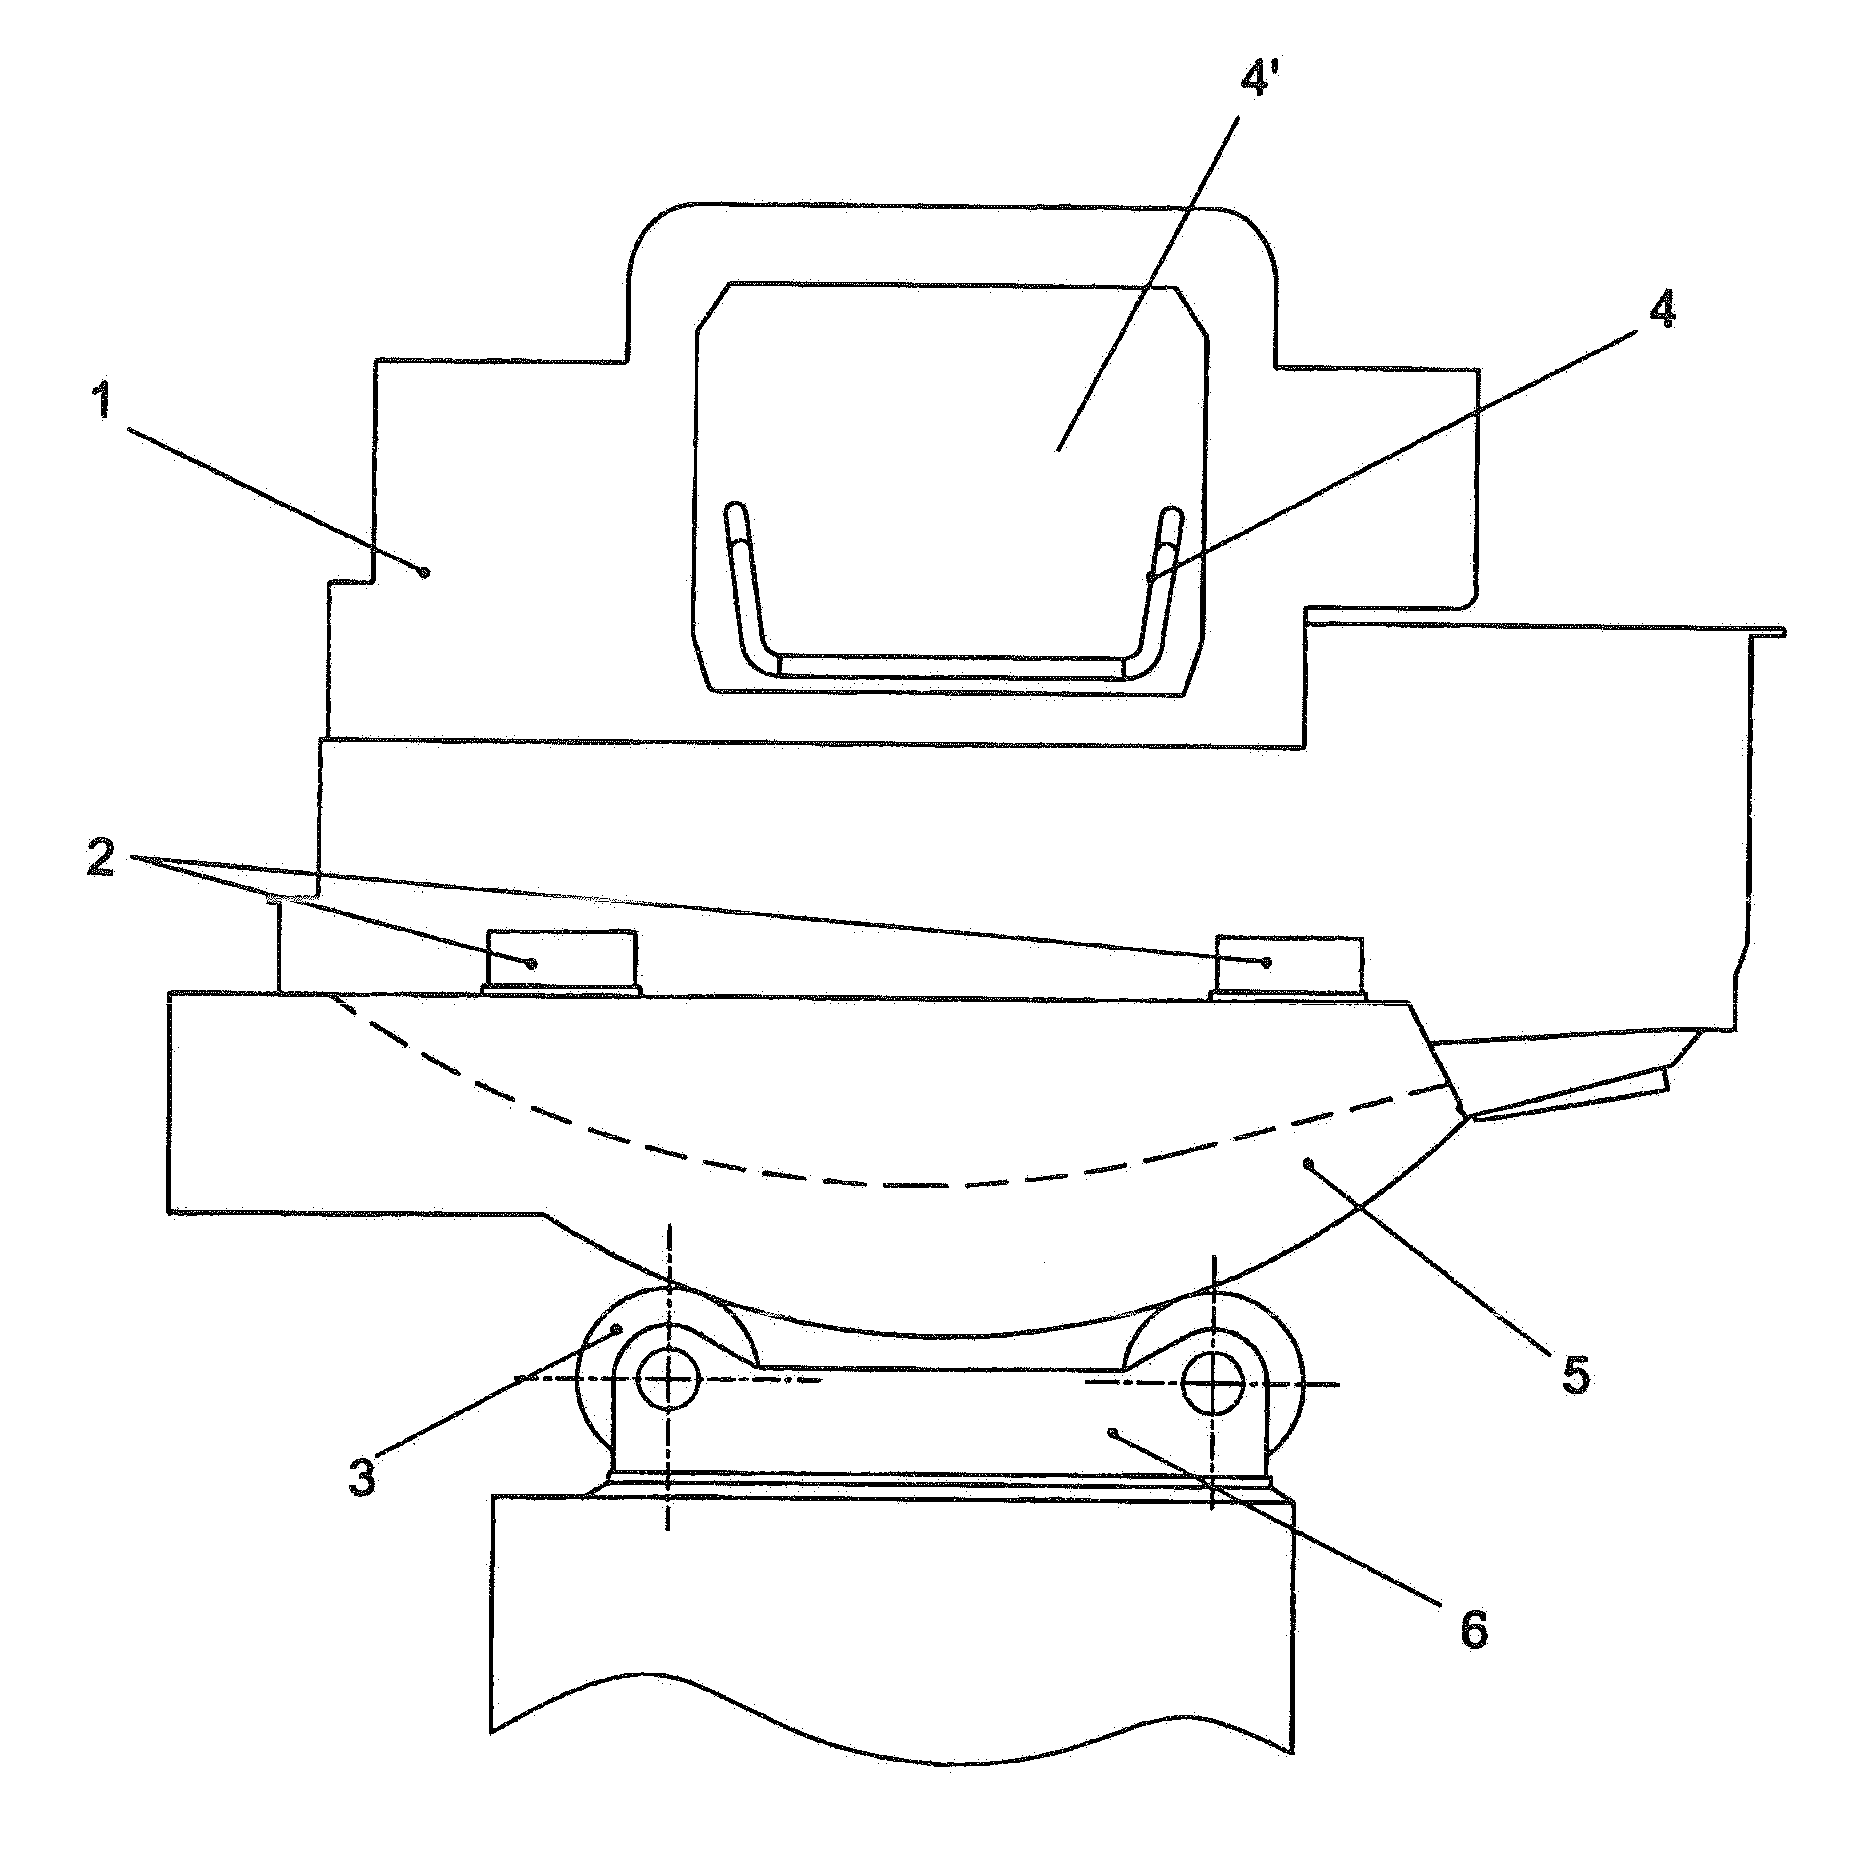 Equipment for measurement and control of load material or scrap feeding into a furnace and relative method